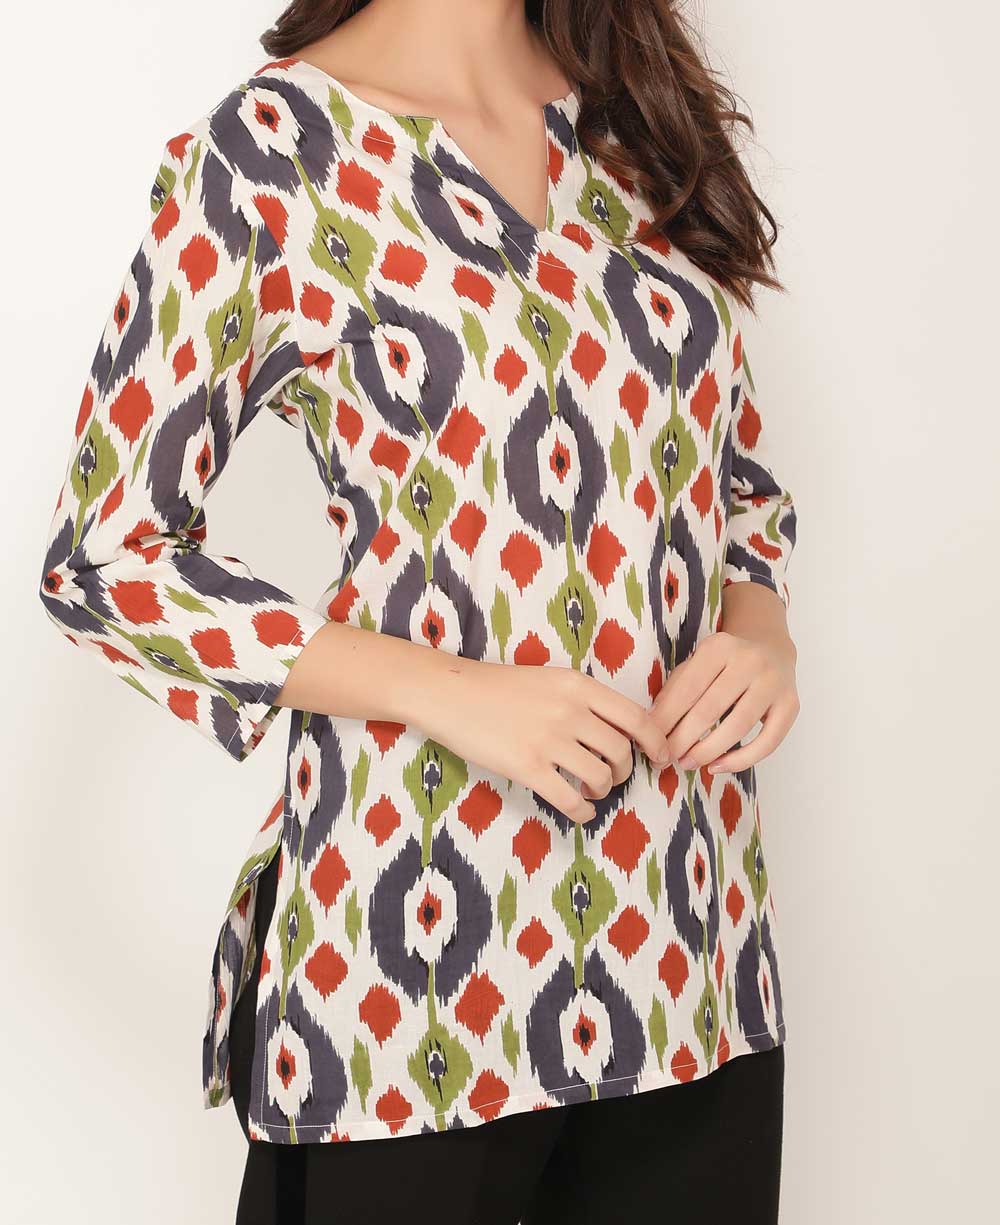 Tropical Geometry Lightweight Cotton Tunic Top - Apparel S